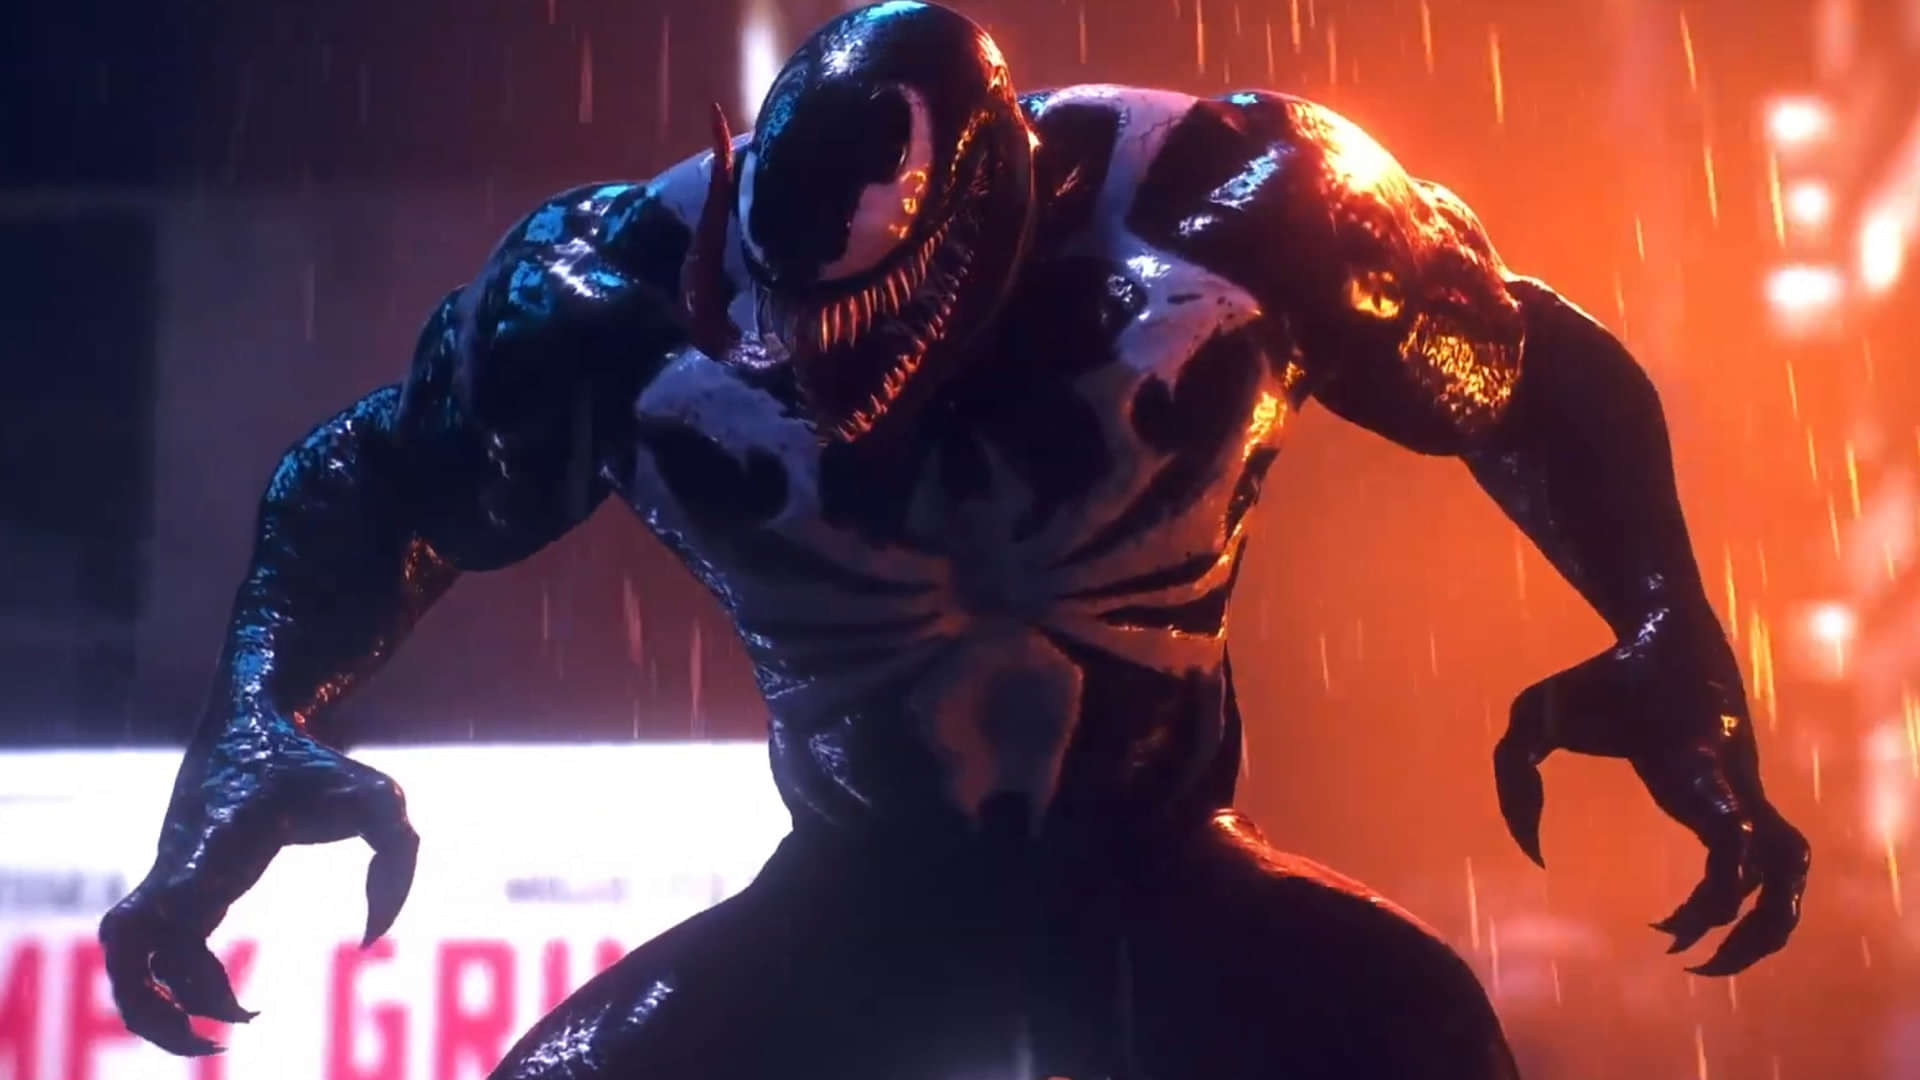 Will Venom appear in Spider-Man 2 DLC or get a standalone game? - The  SportsRush